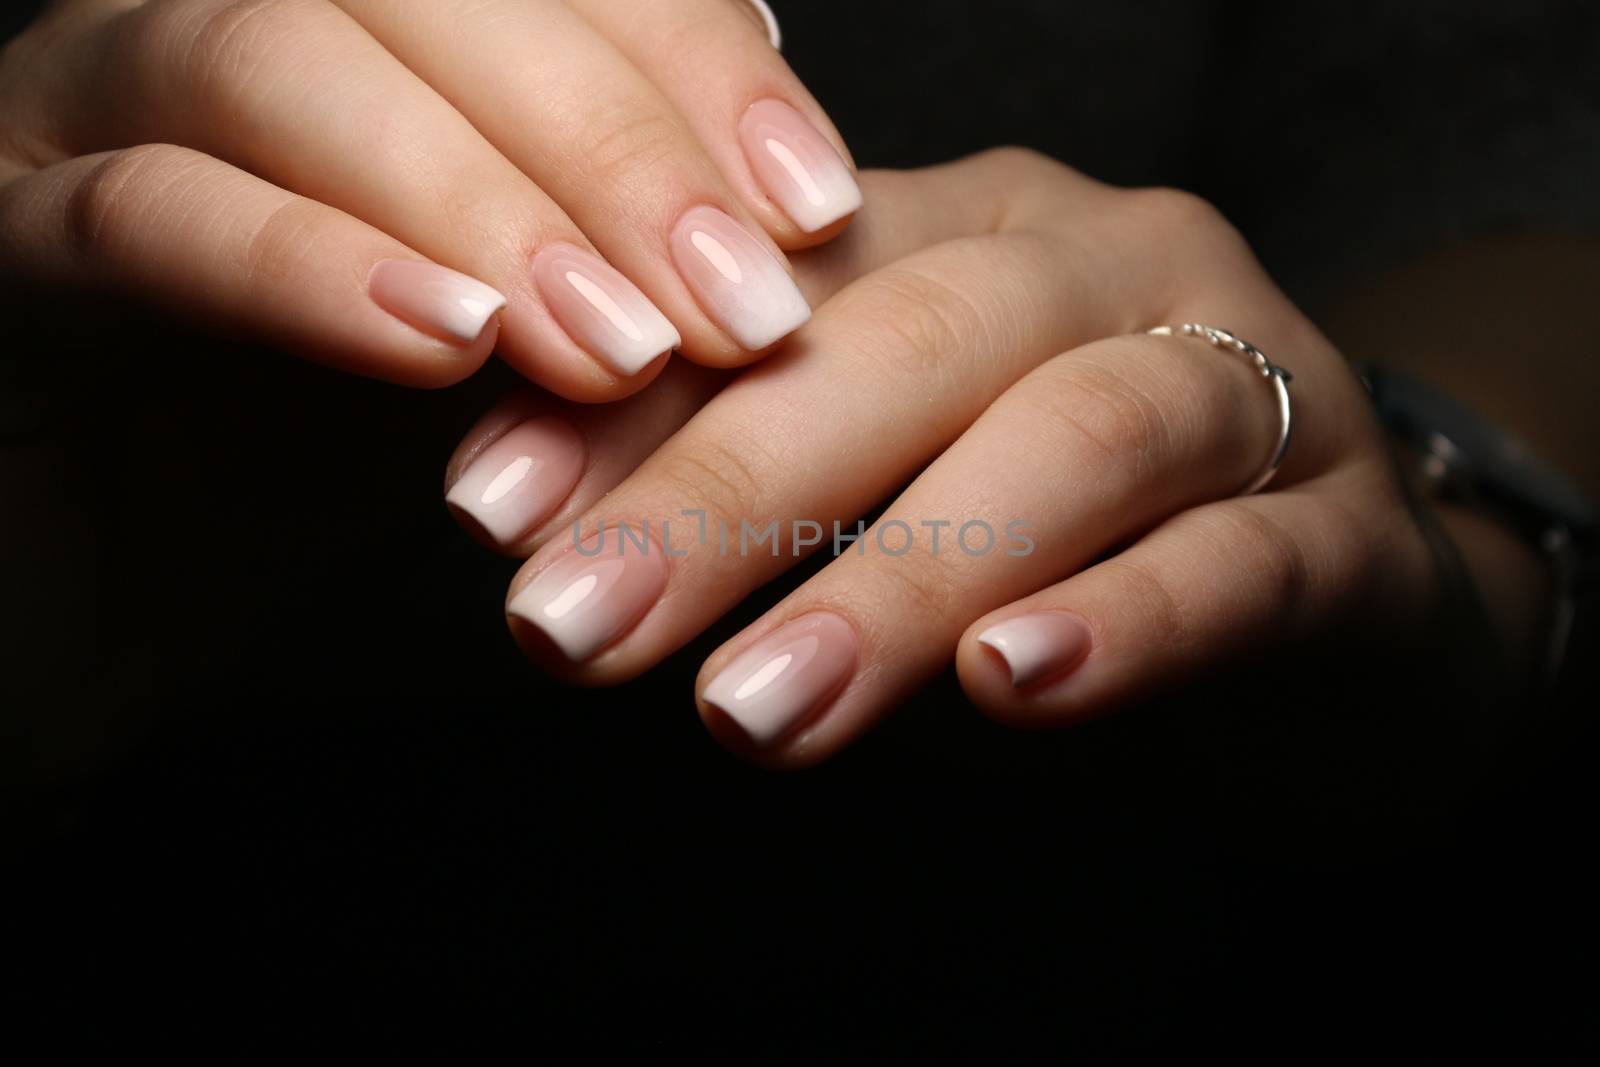 The beauty of the natural nails. Perfect